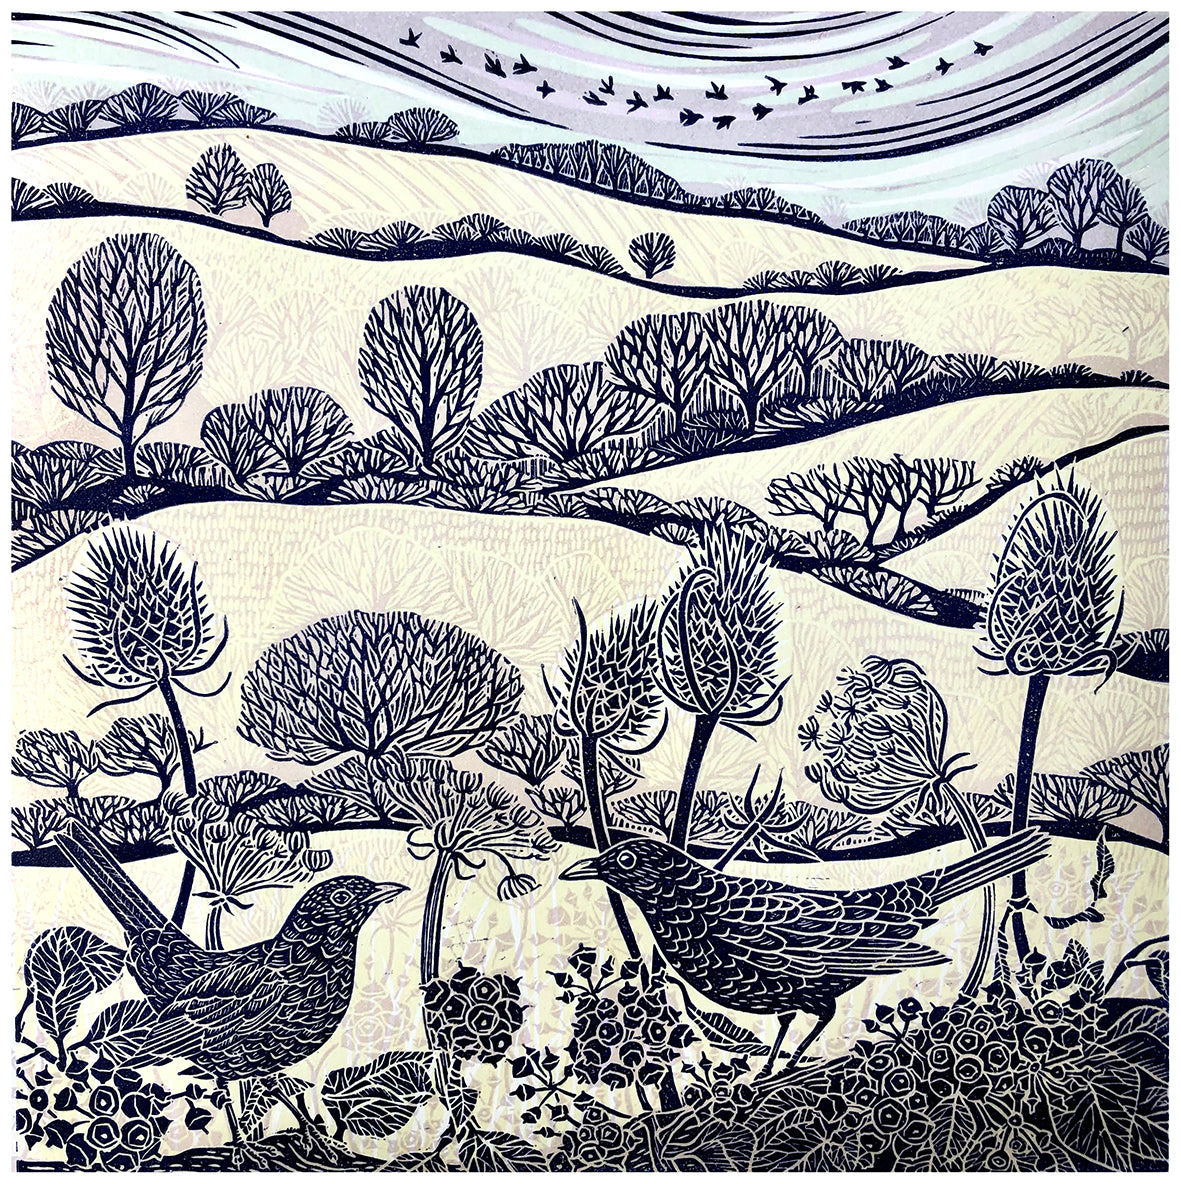 Blackbird Fields of Gold limited edition lino print by Claire Armitage